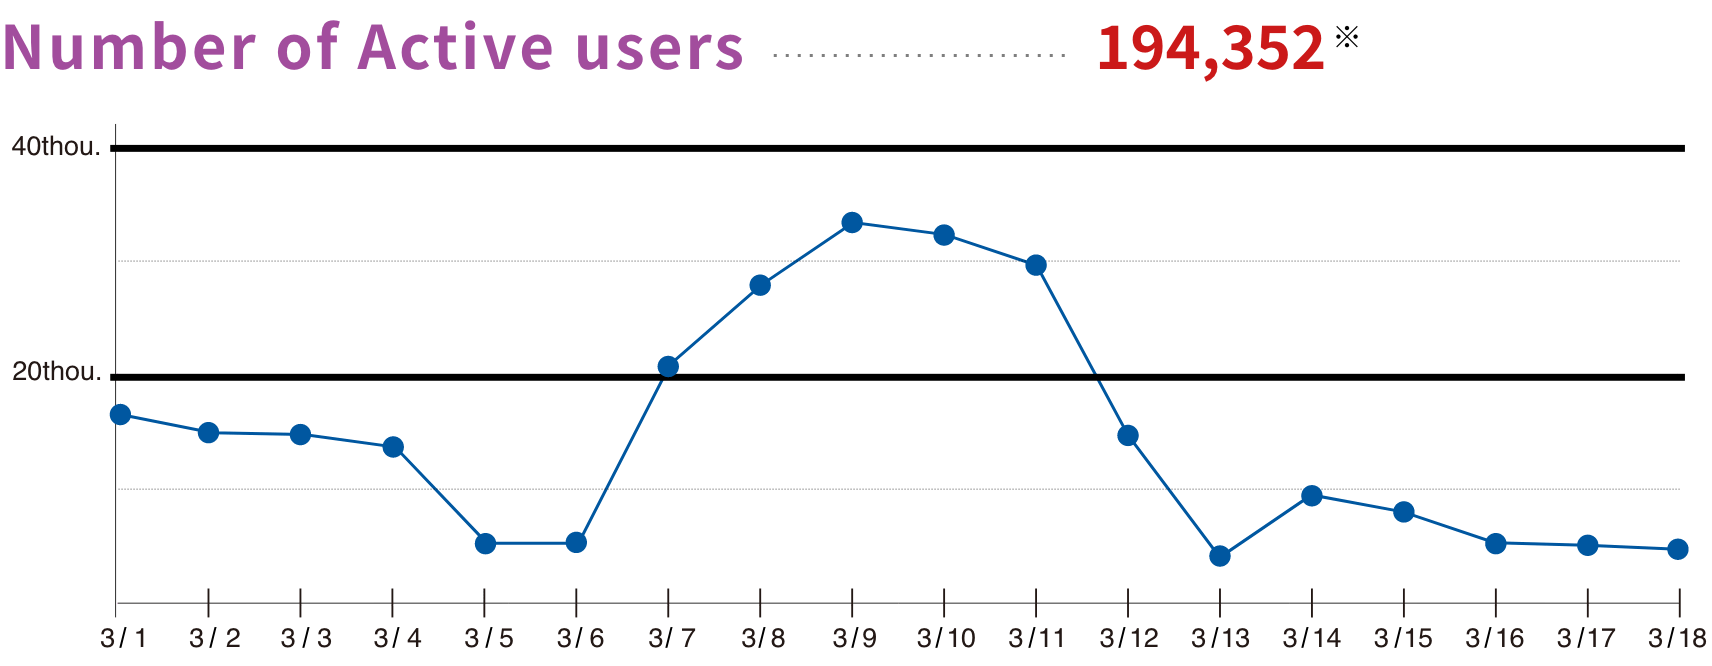 Number of Active users